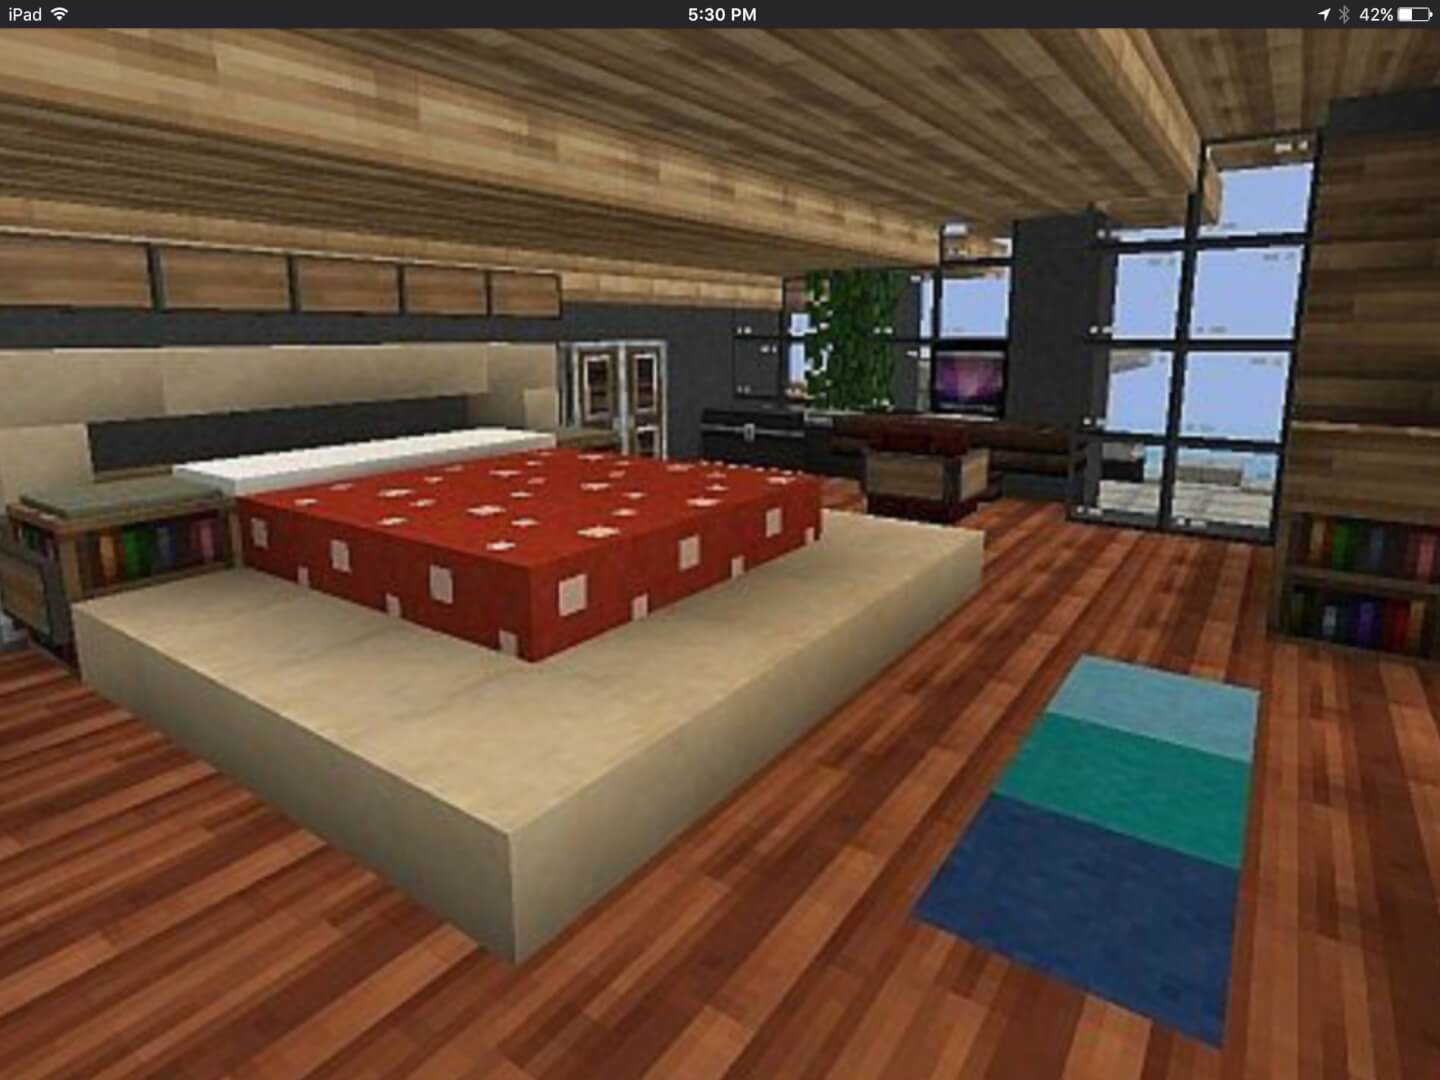 Mushroom Bed Minecraft Furniture, How Do You Make A Bed In Minecraft 2020